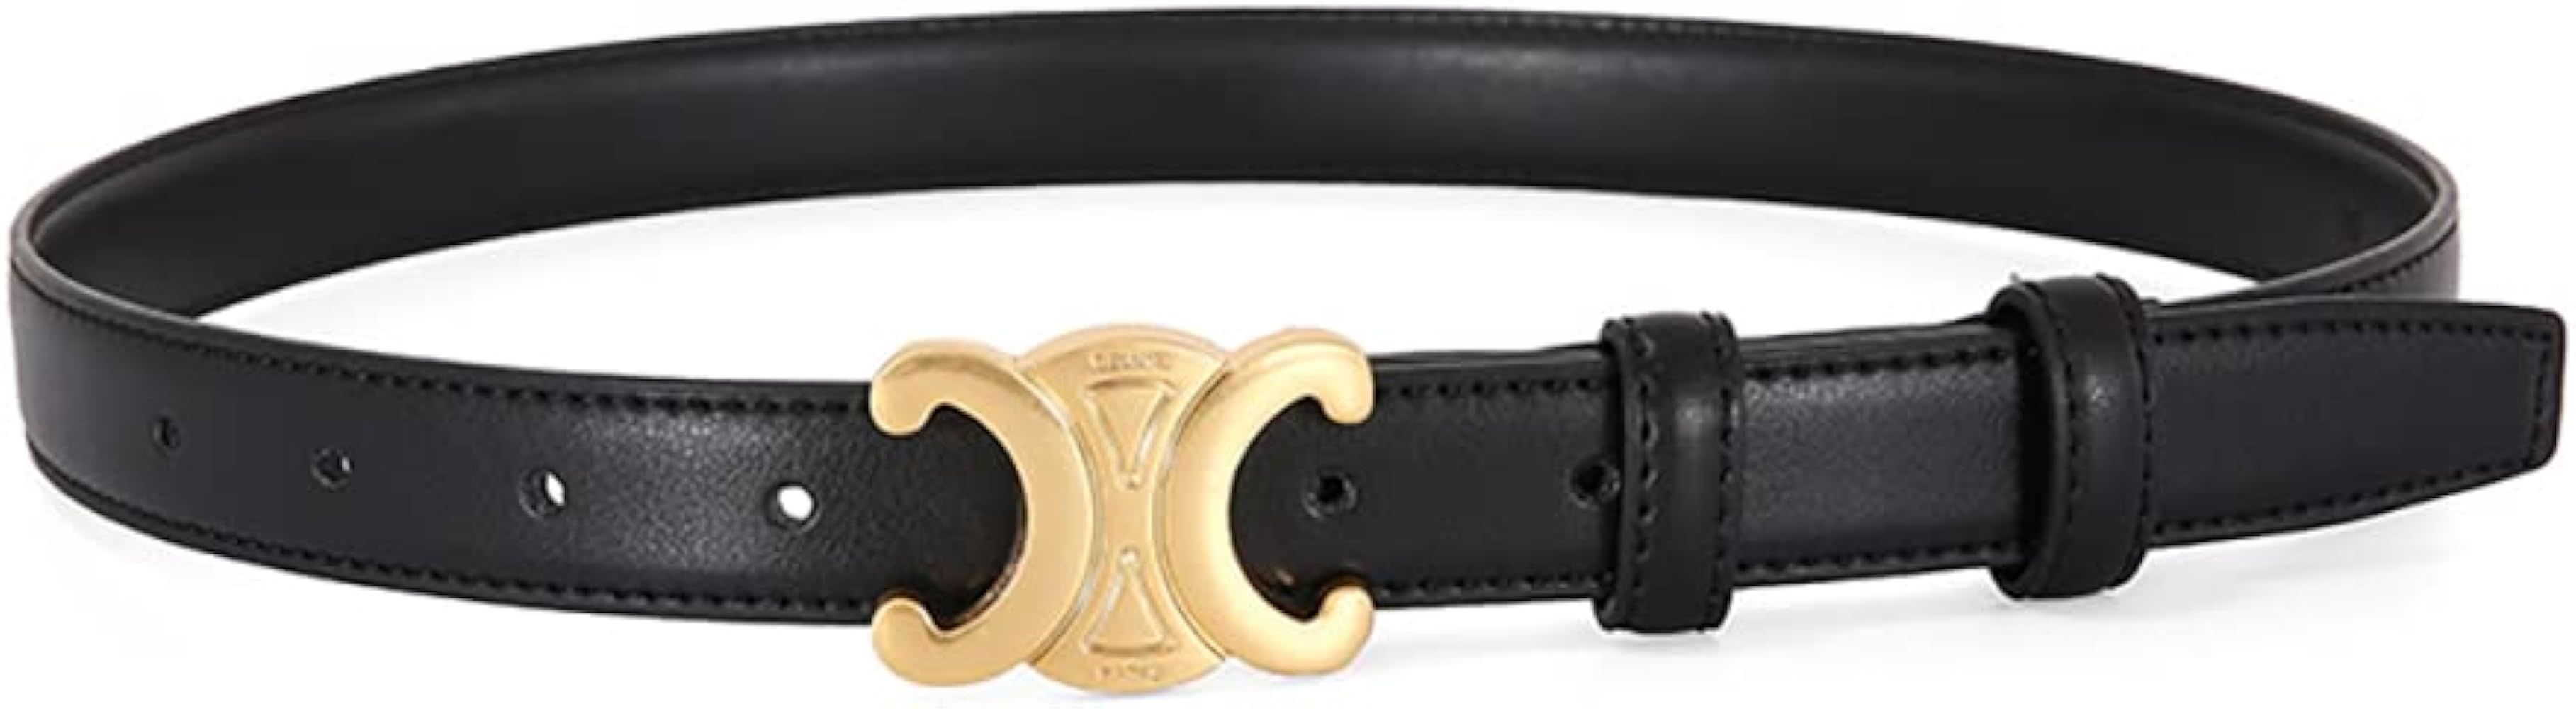 MoYoTo Women’s 2.5cm Thin Leather Belt Fashion Designer Belts for Jeans Pants Dresses with Gold Buck | Amazon (US)